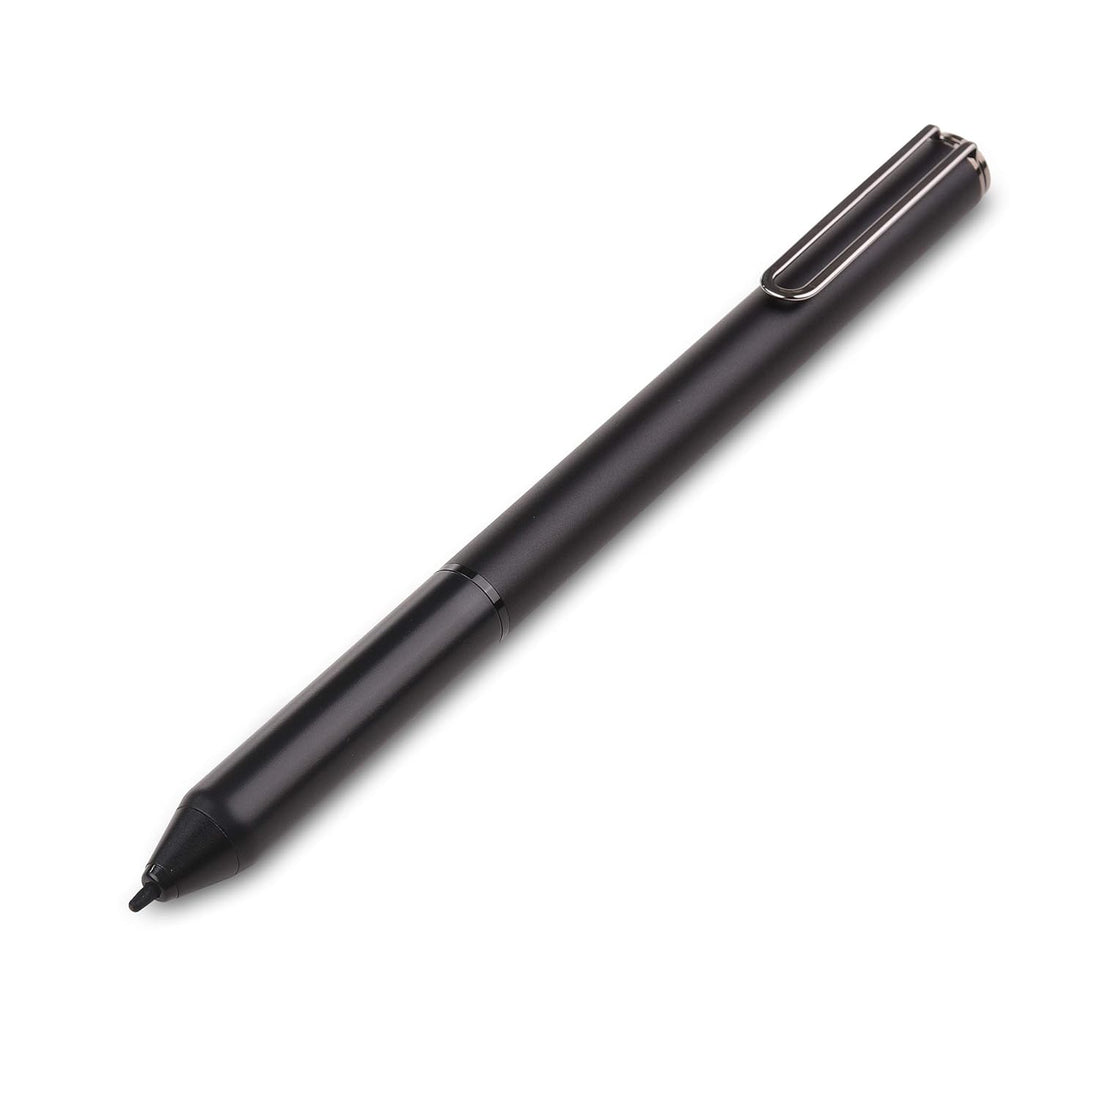 Active Capacitive Pen for likebook P10 E-Reader